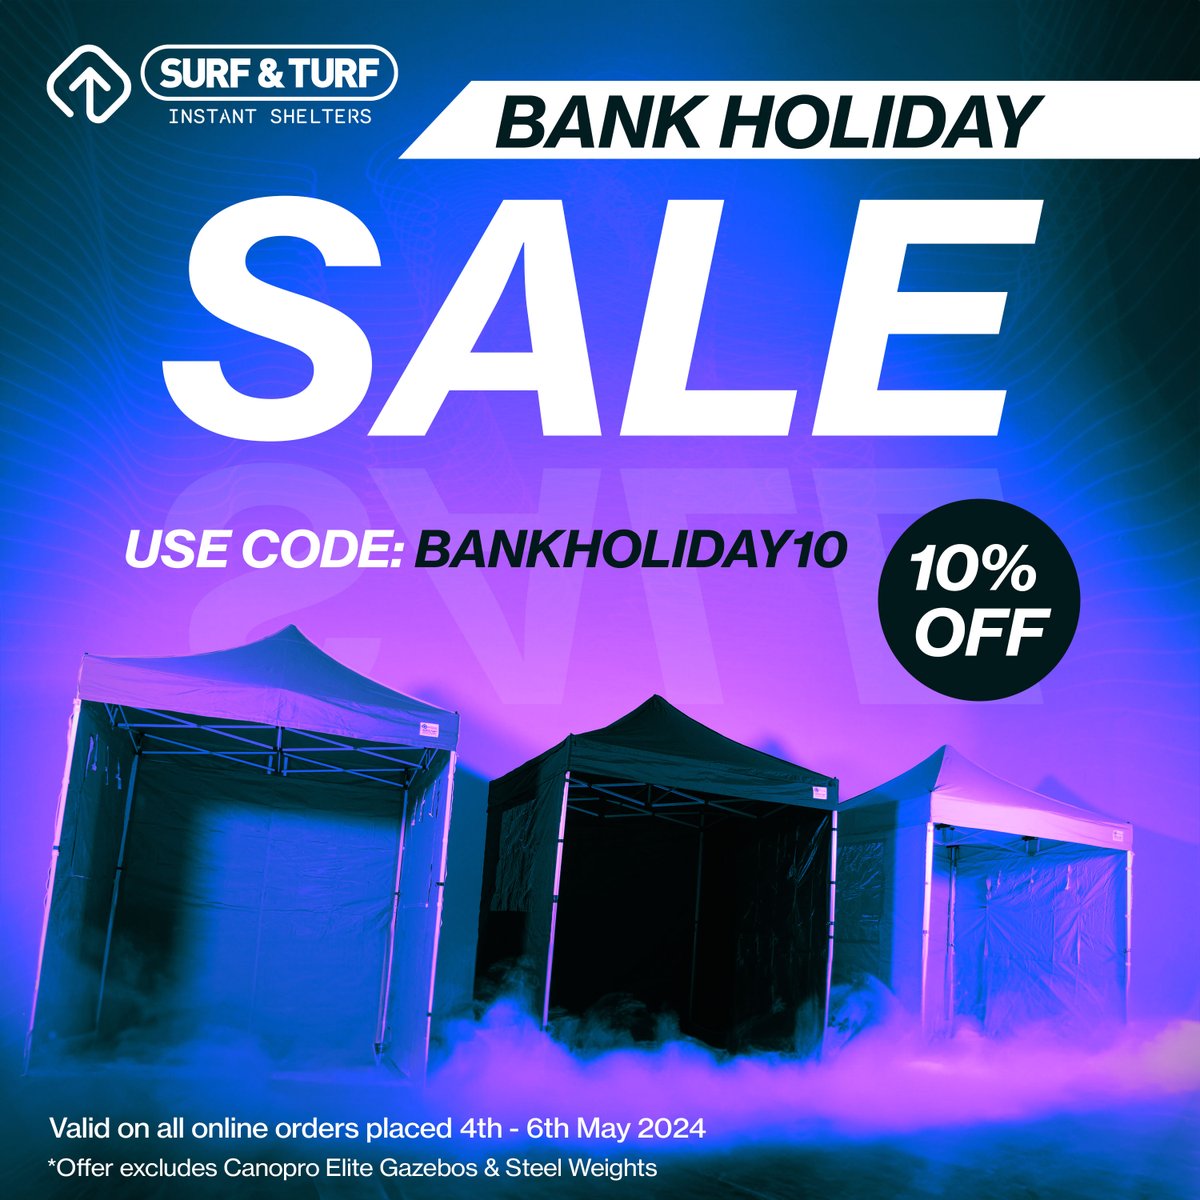 ➡️10% OFF this bank holiday! Grab yourself some discount this weekend ahead of the summer events season! Use code BANKHOLIDAY10 at checkout on online orders placed 4th-6th May.